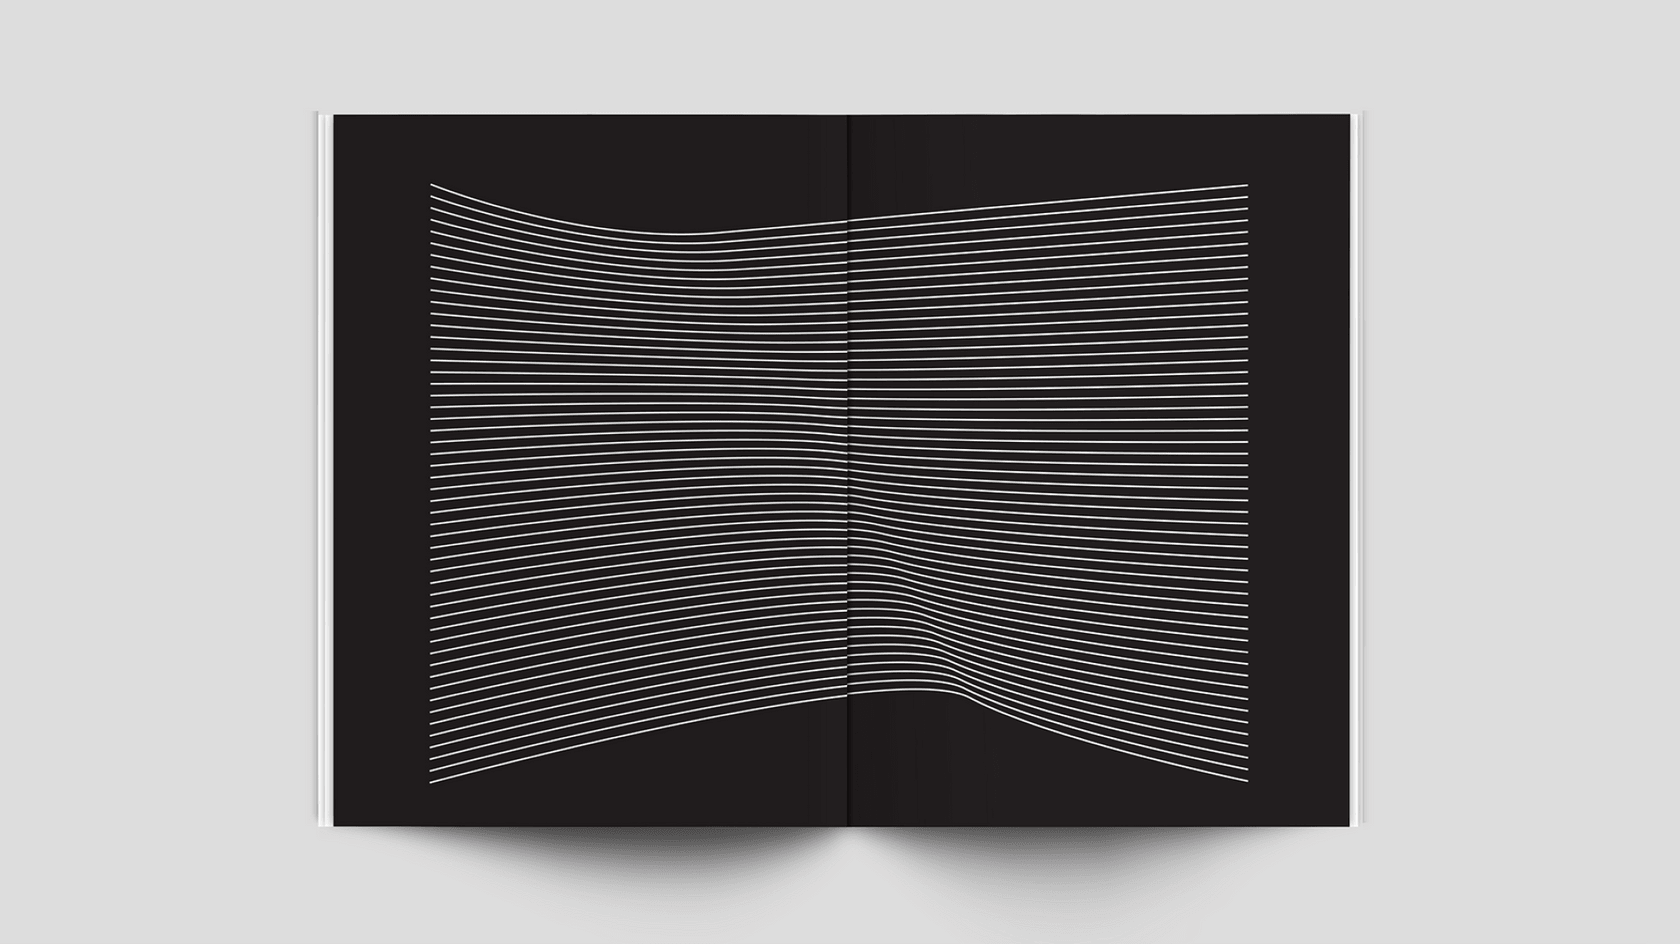 Thin, wavy white lines on a black background, creating a visual illusion.